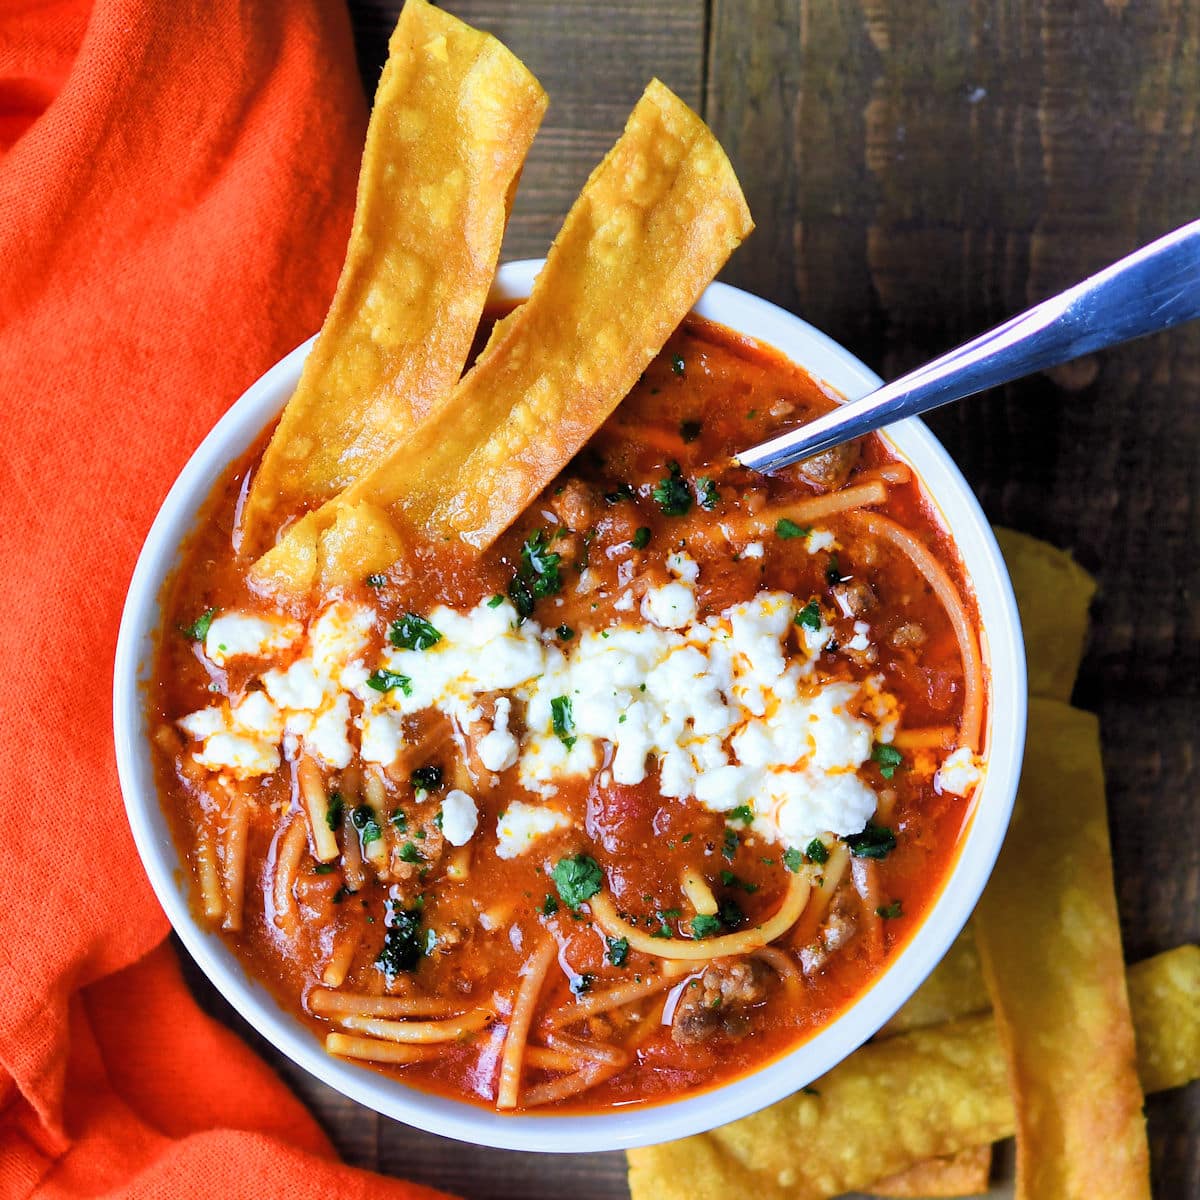 Mexican noodle soup is deep roasted red color with long thin noodles. It is garnished with crumbled white cheese and some tortilla strips.